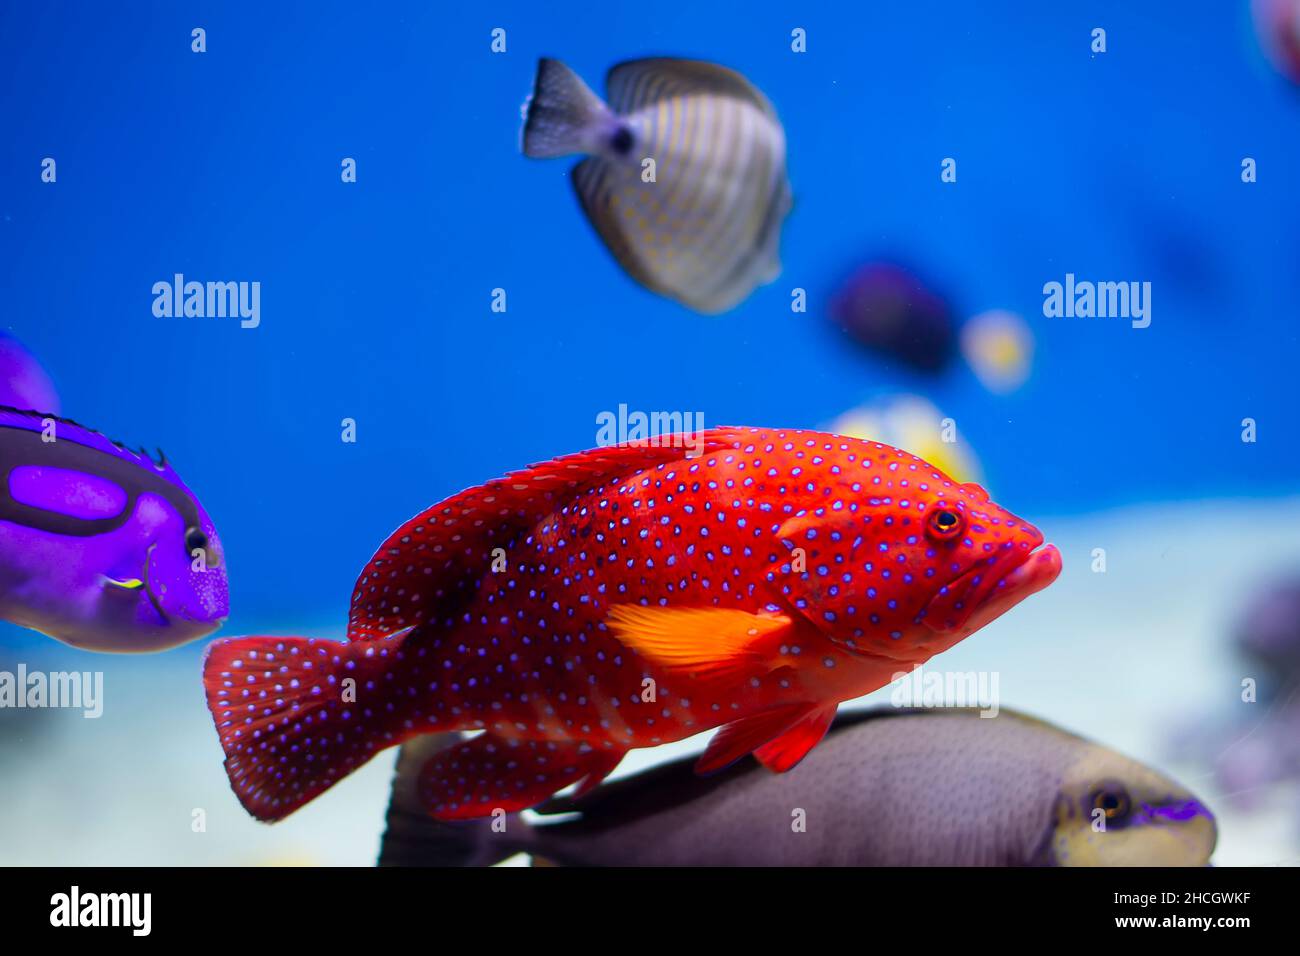 Beautiful exotic fish in the water. Stock Photo